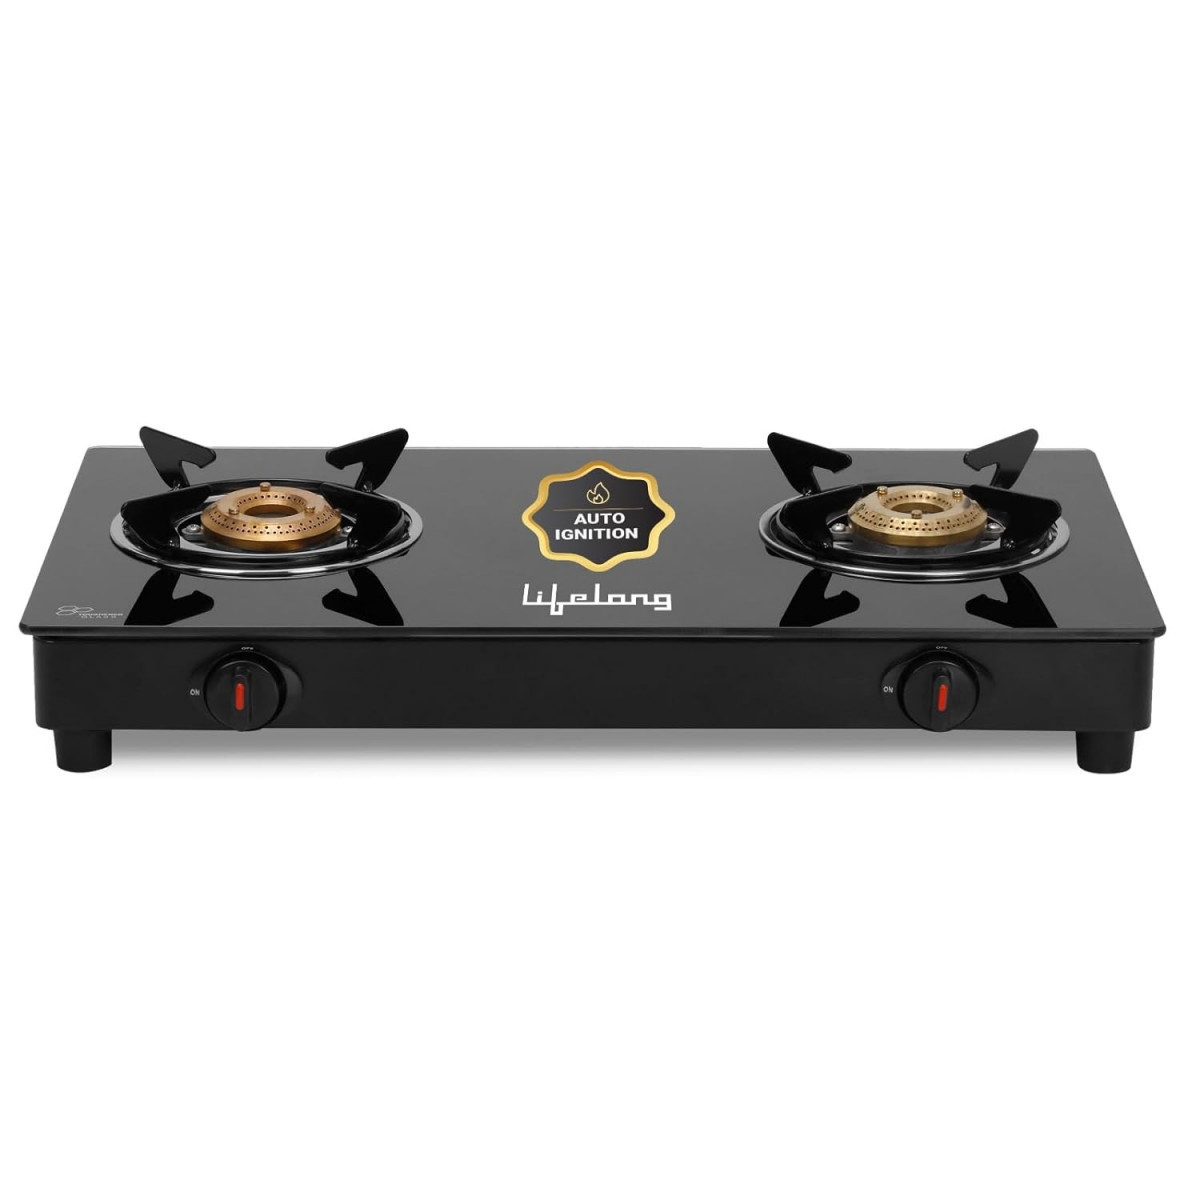 Lifelong 2 Burner Gas Stove Top for Kitchen - Automatic Ignition Cooktop Modern Glass Stove